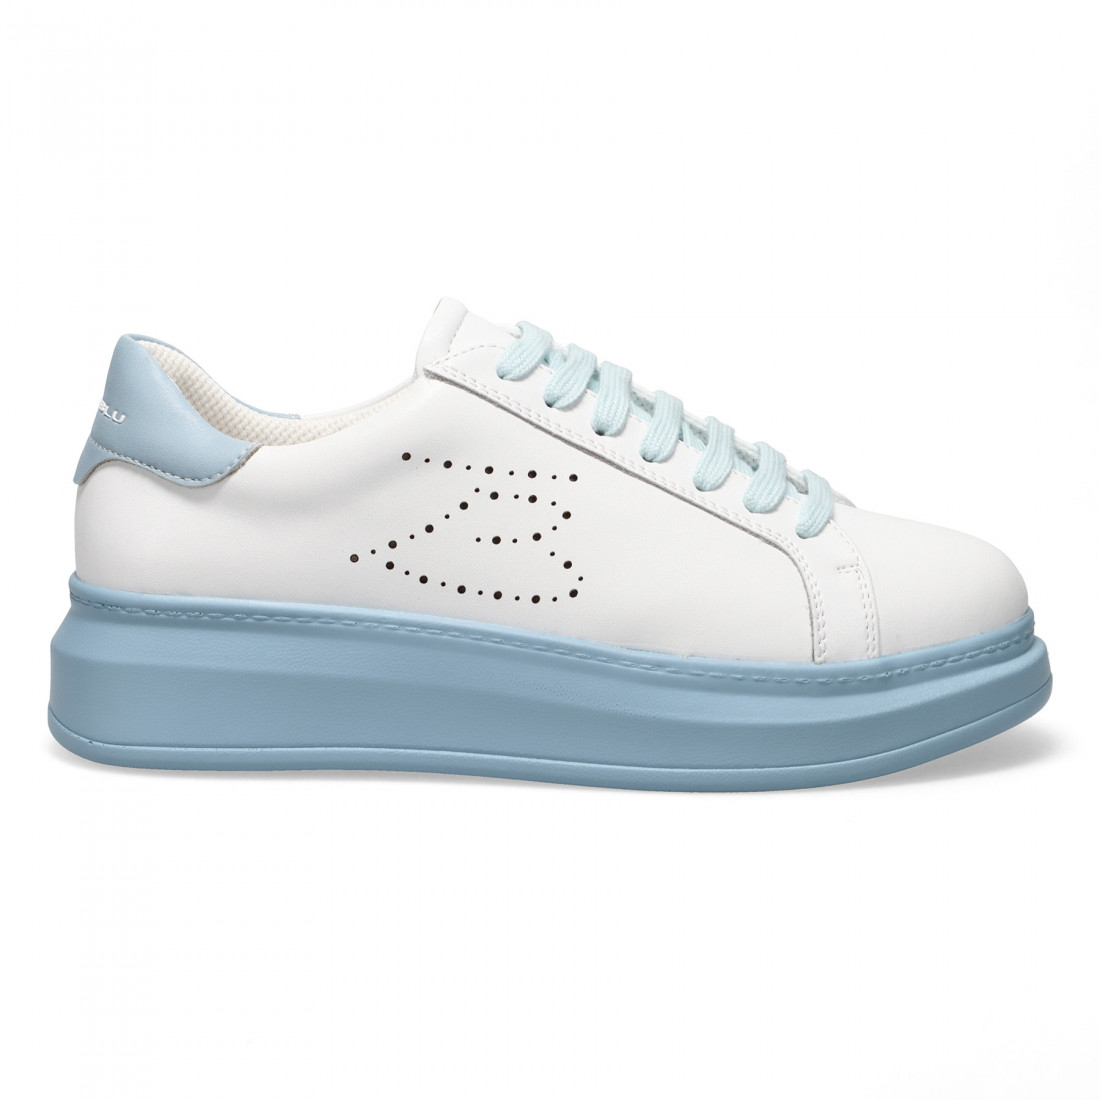 Tosca Blue Leather sneakers-